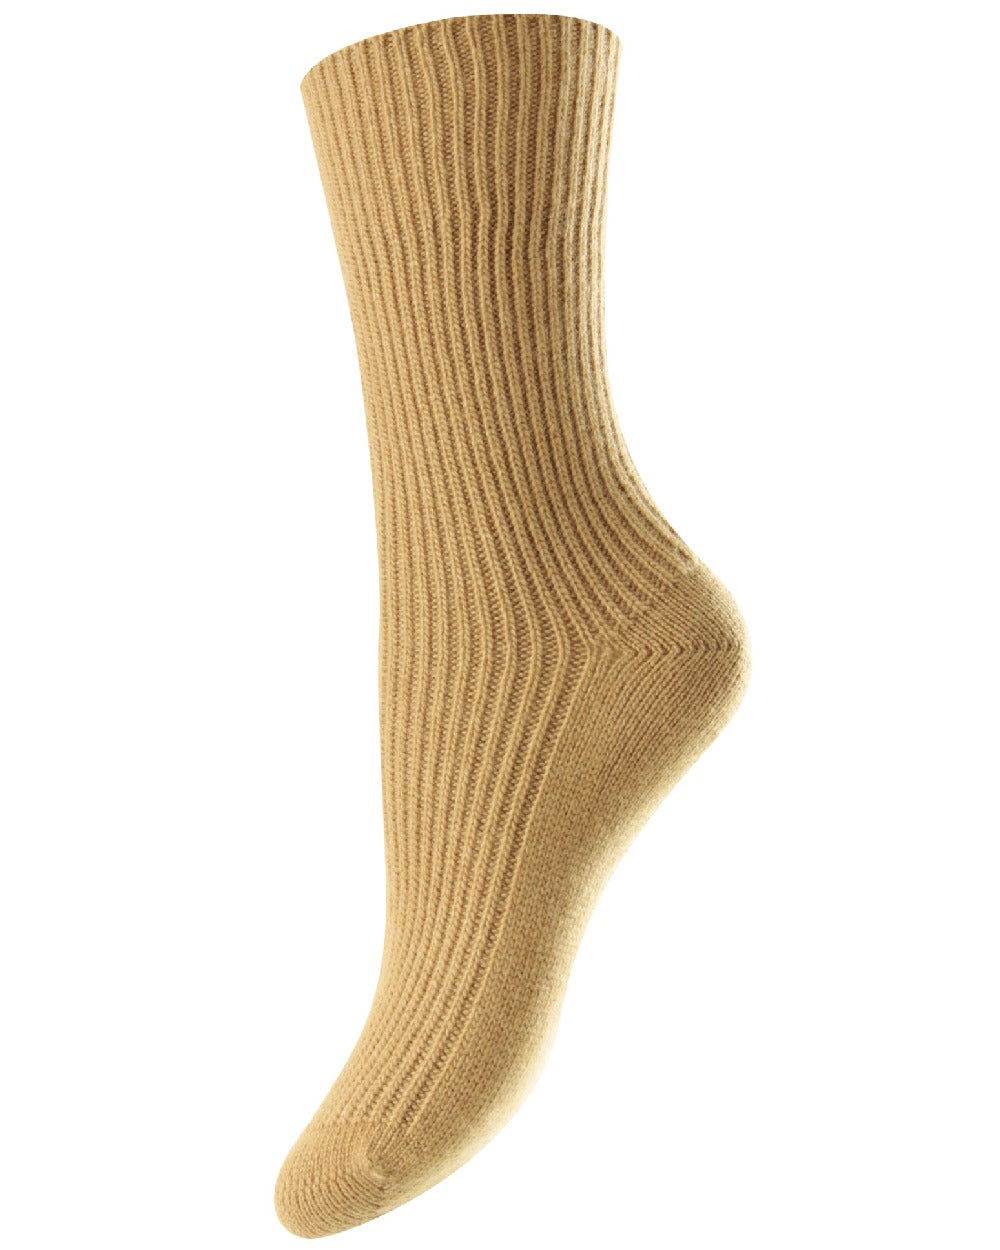 HJ Hall Cashmere Blend Turn Over Top Socks in Toffee 